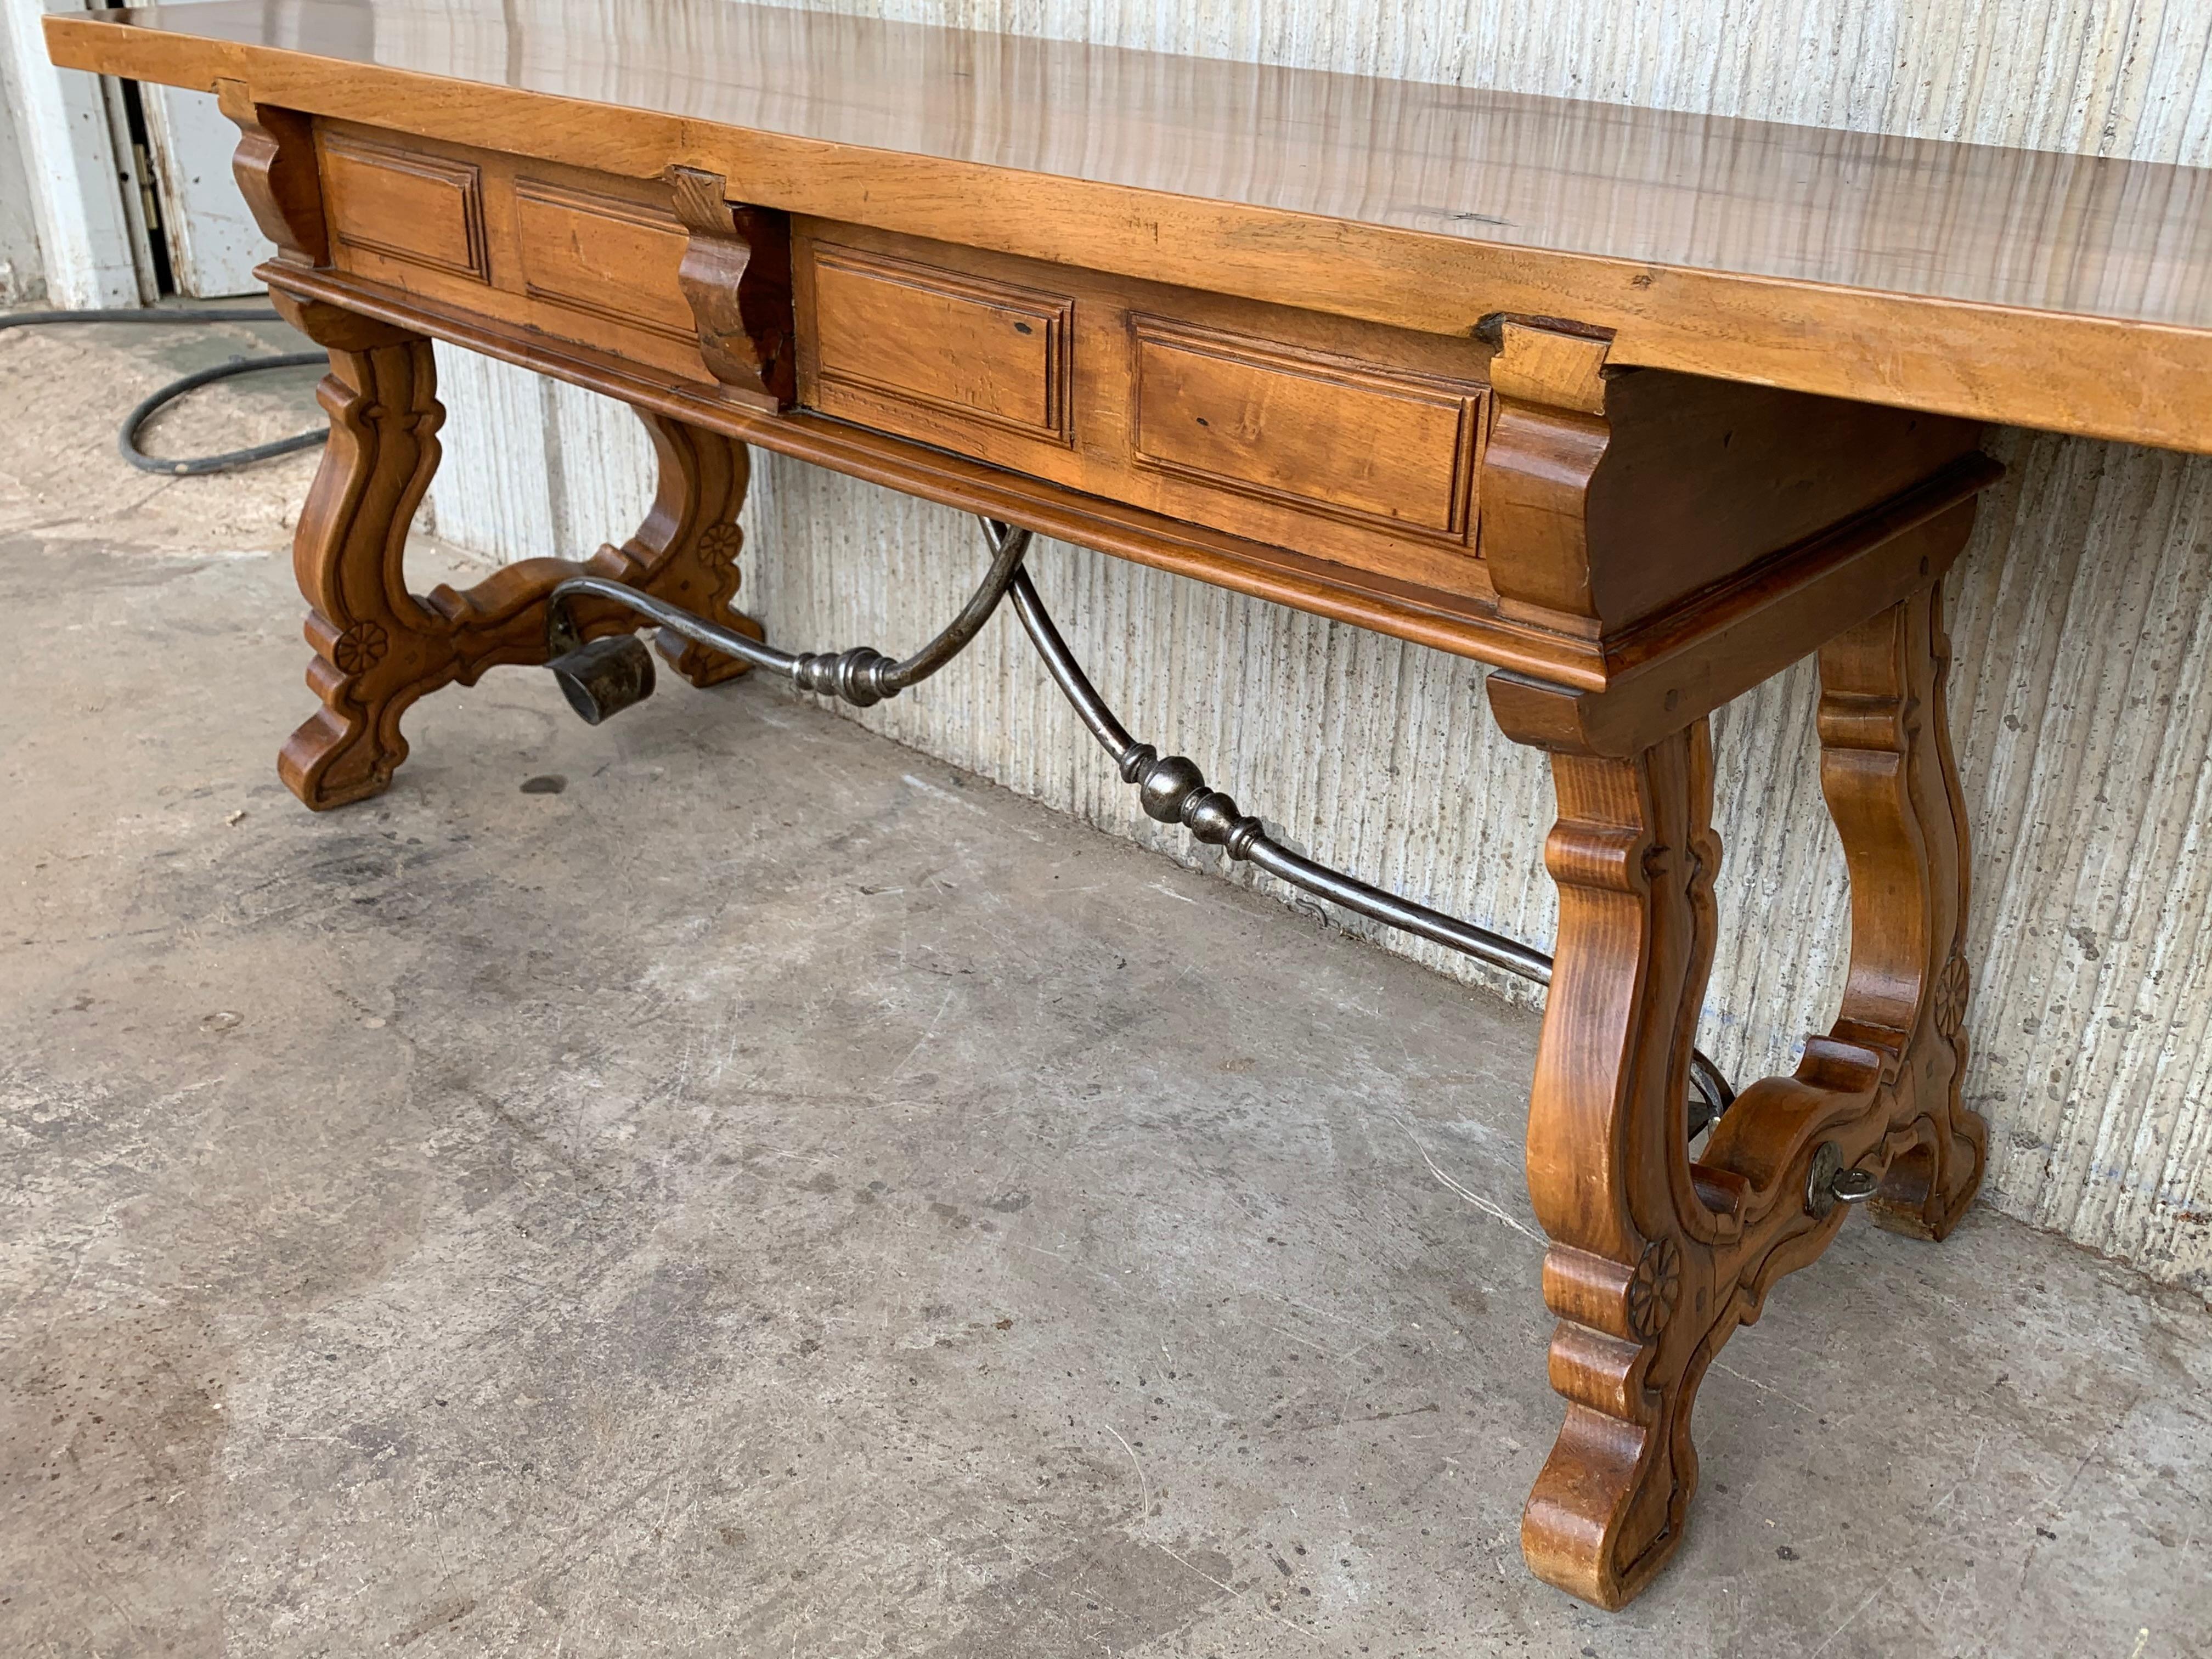 Spanish Bench or Low Console Table with Drawers, Lyre Legs and Iron Stretcher In Good Condition For Sale In Miami, FL